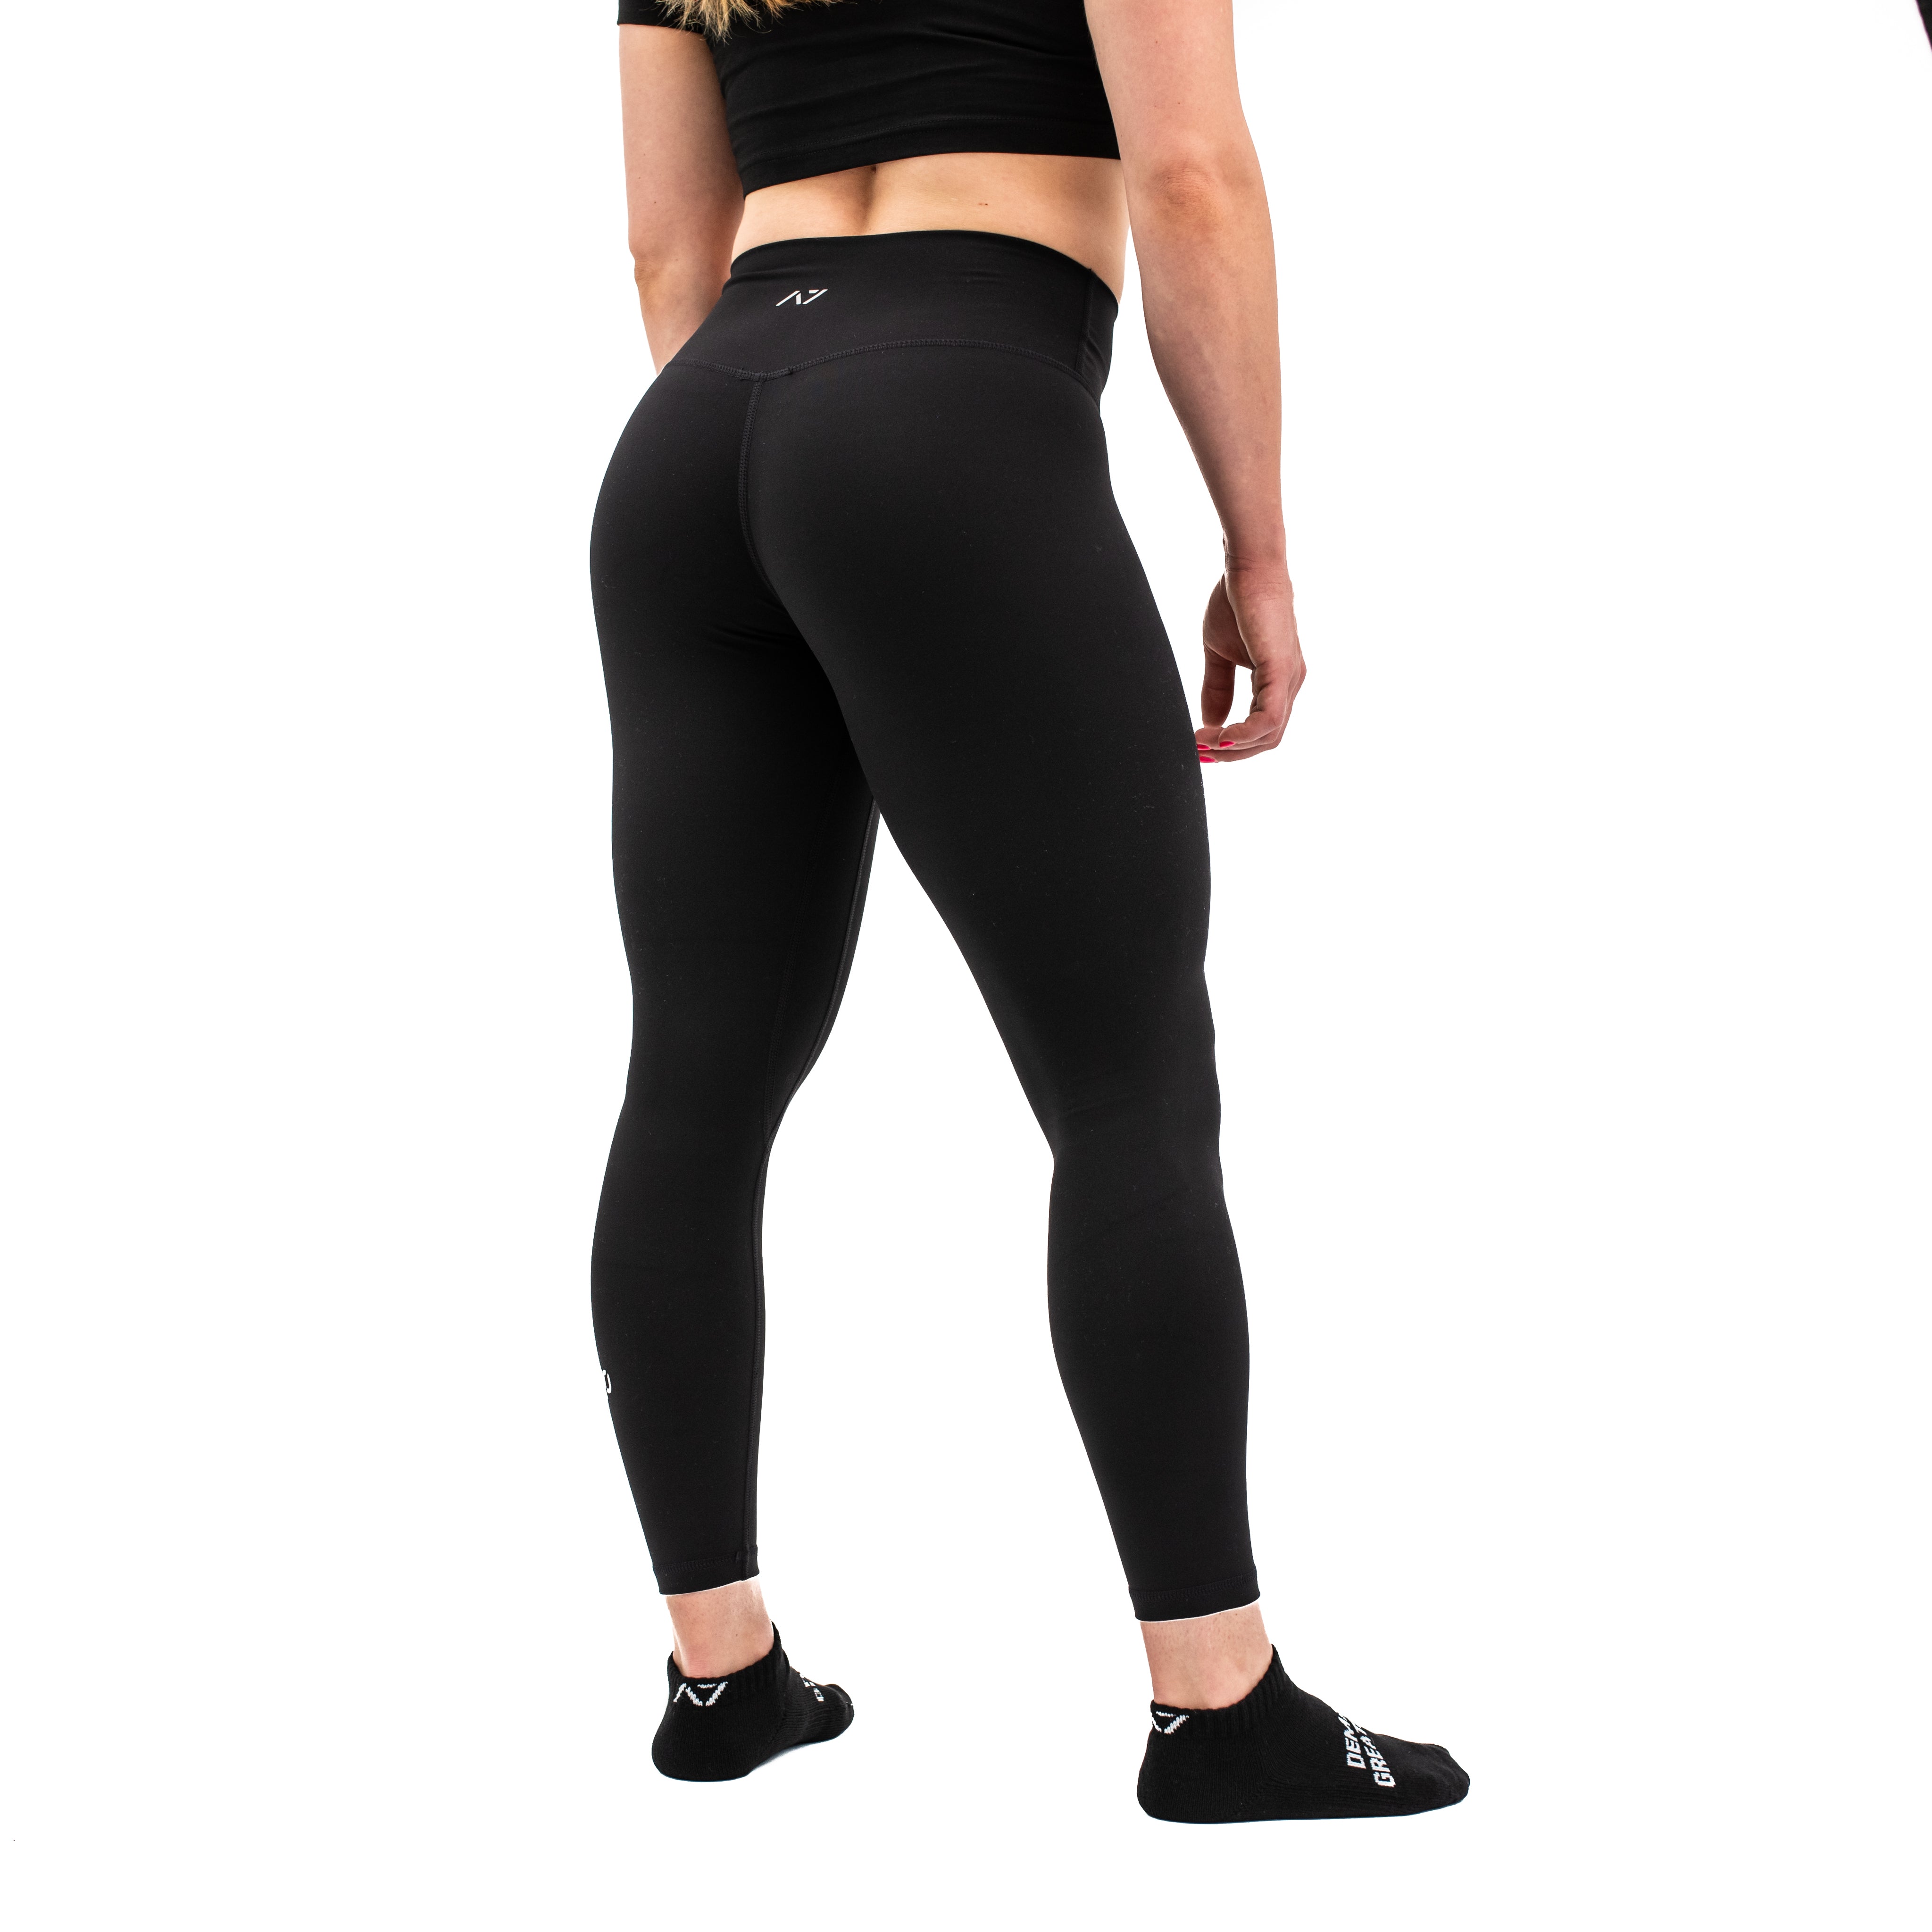 custers Night Workout Leggings for Women Seamless Scrunch Tights